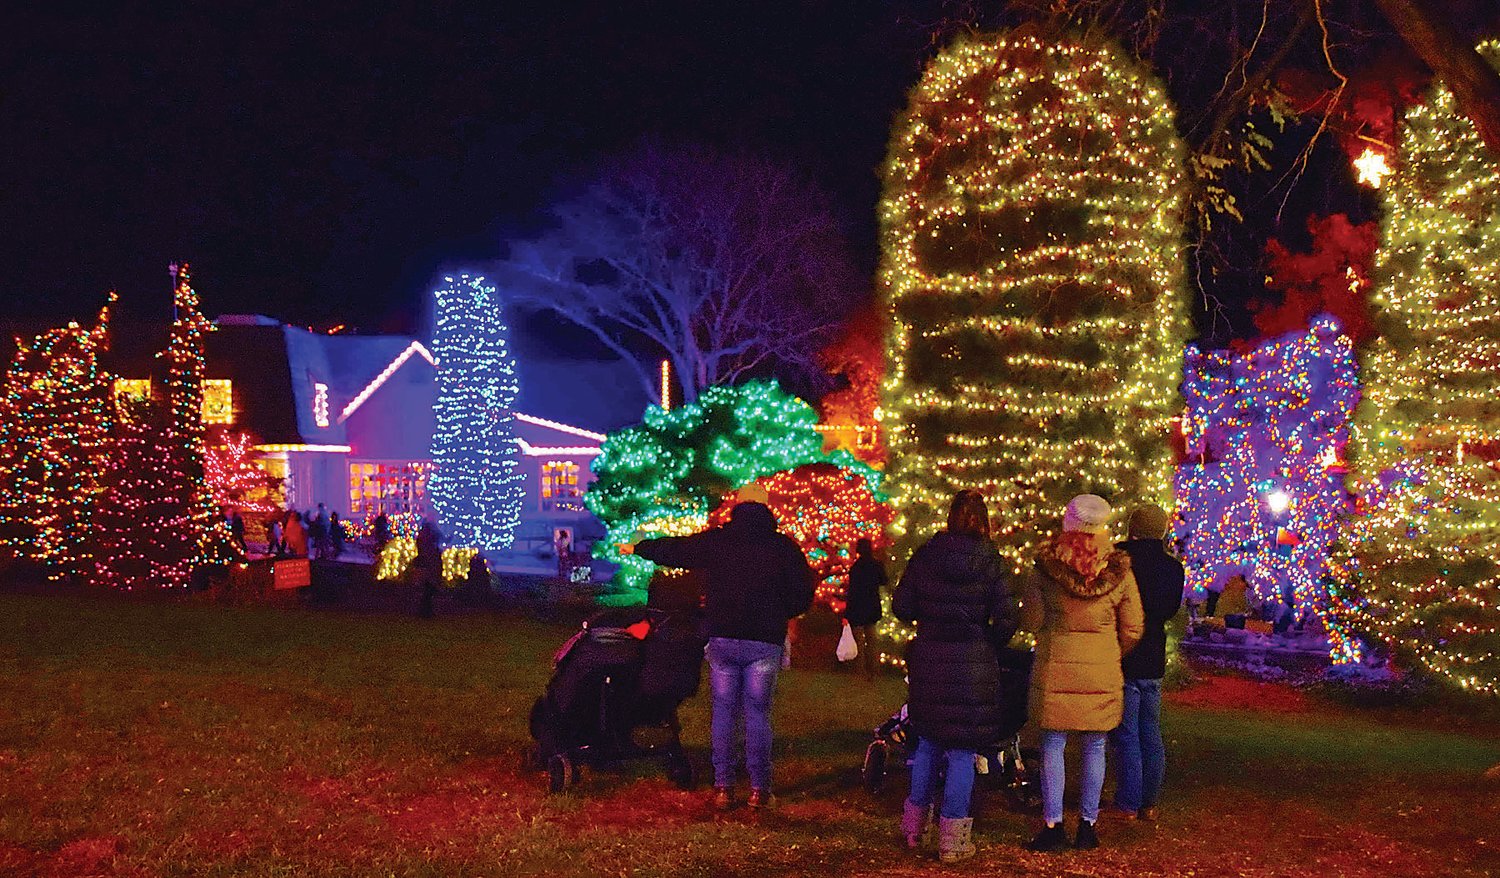 Peddler’s Village opened the 2021 holiday season on Nov. 19 with a display of a million lights.